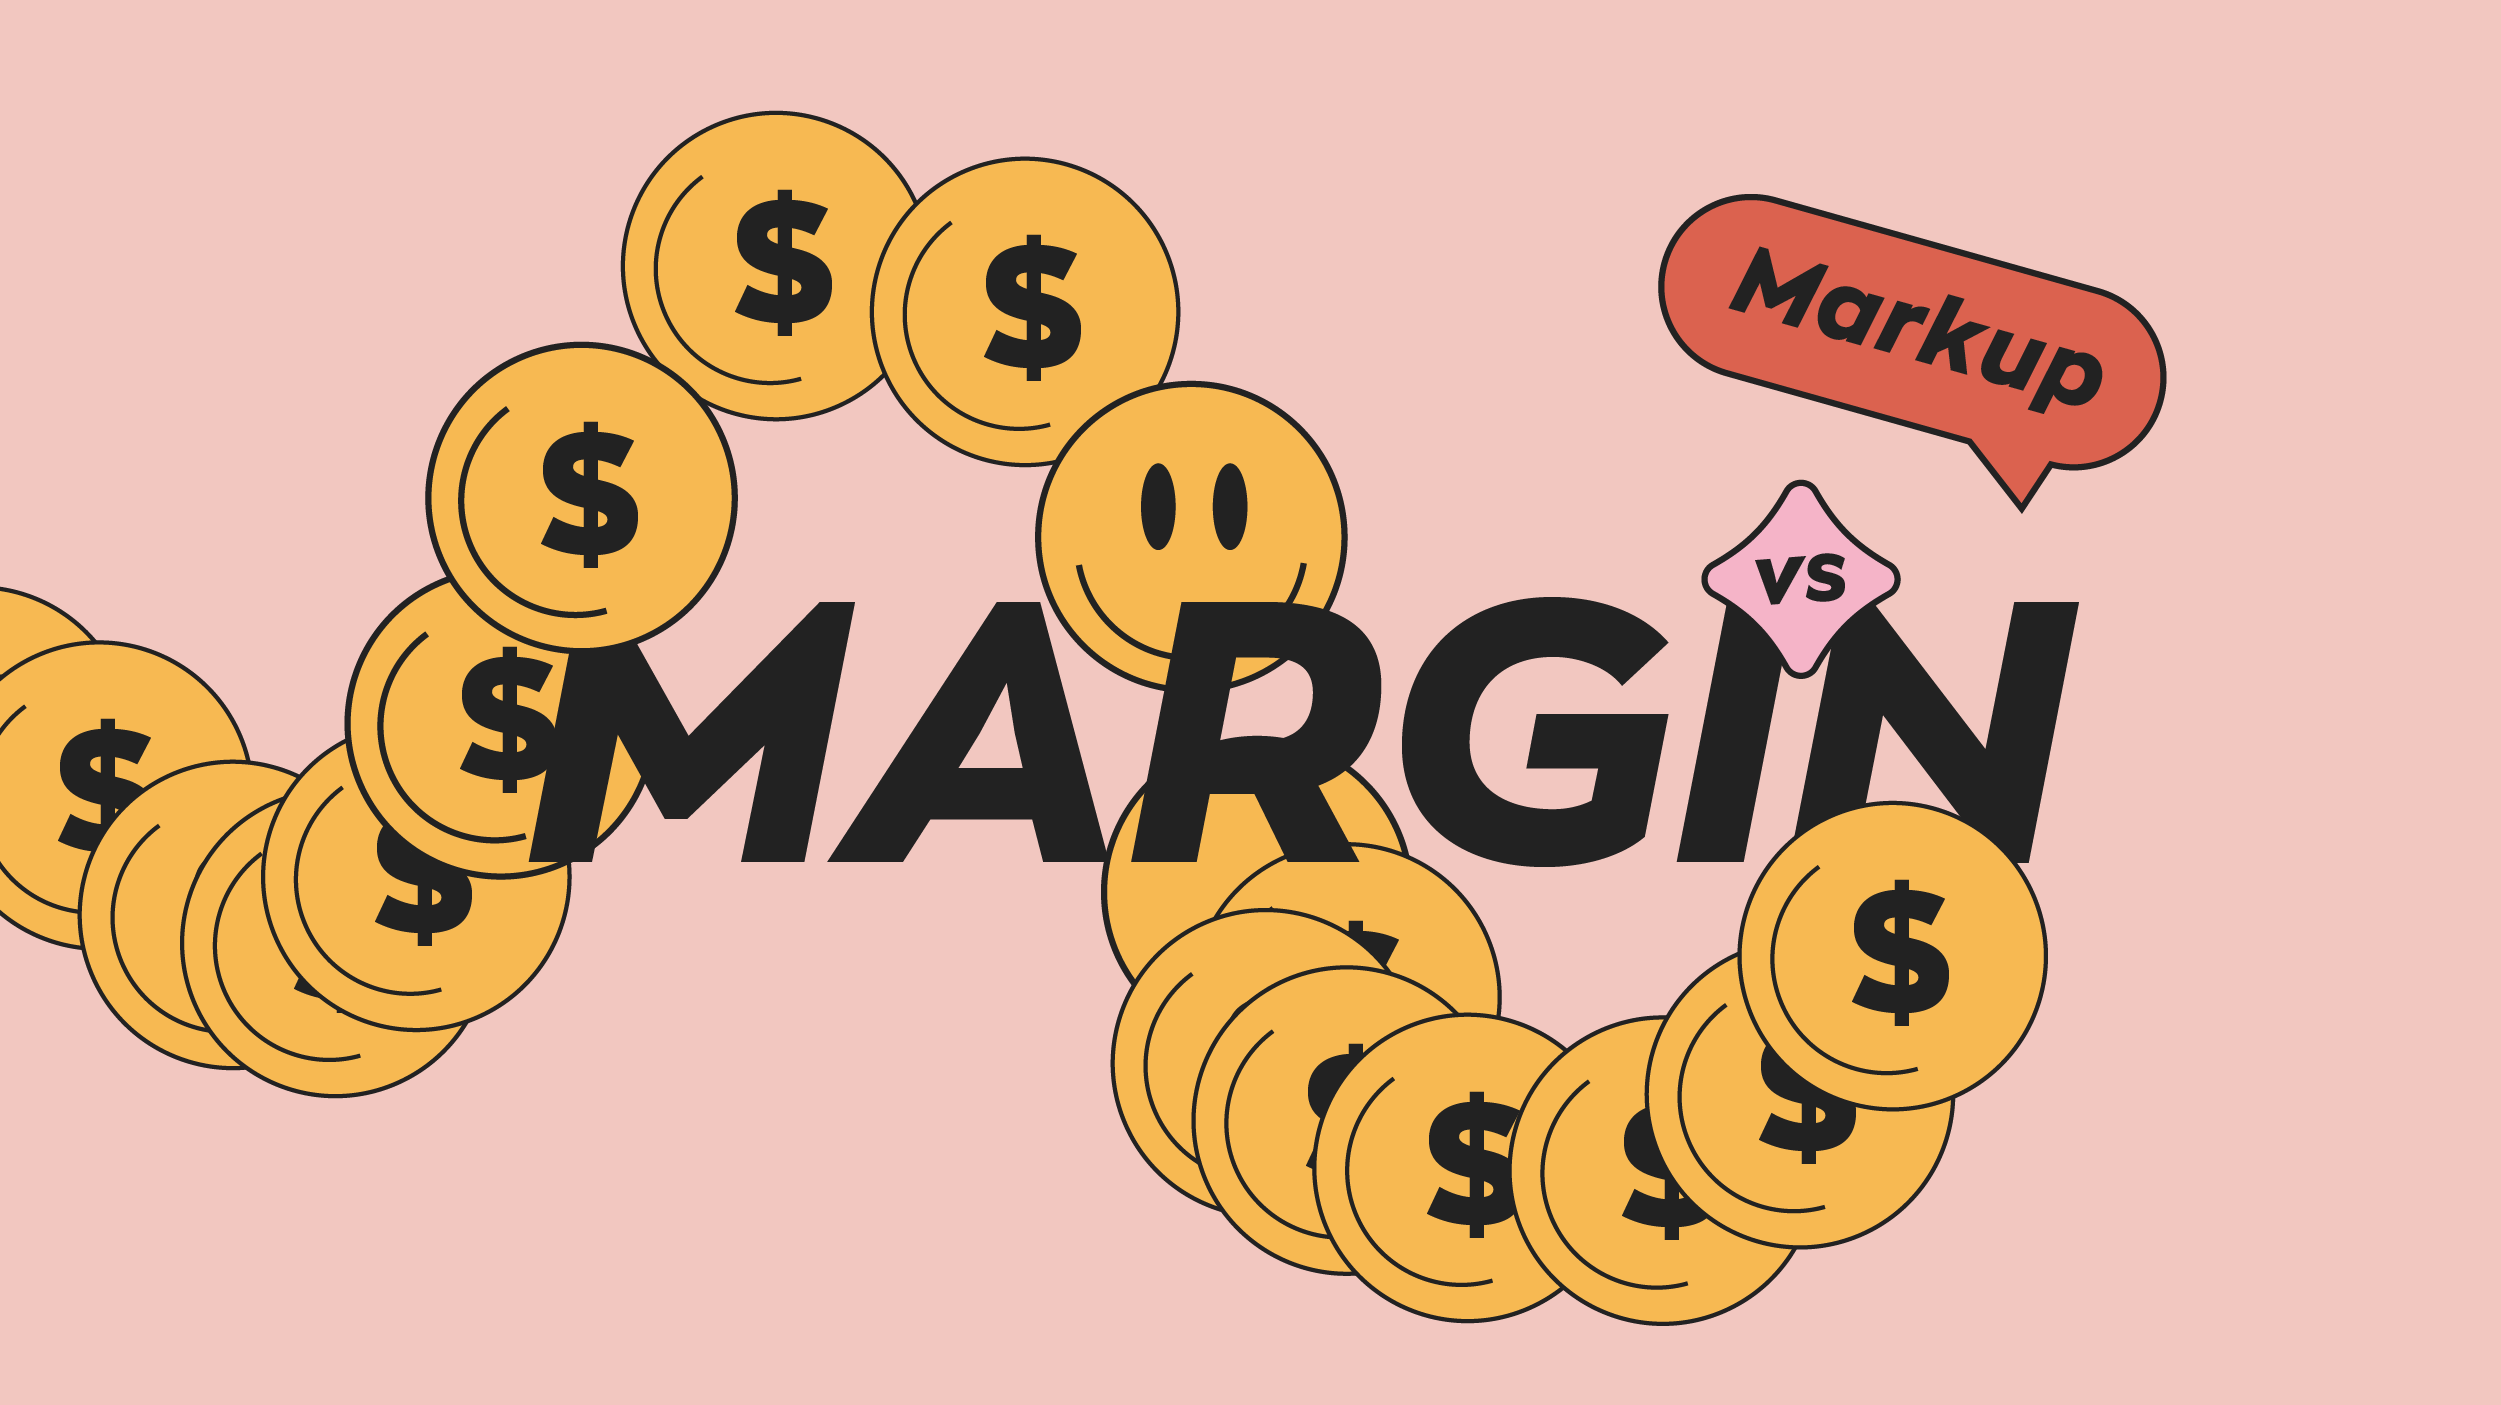 Margin vs. Markup: Which Formula is Best For Your Business?